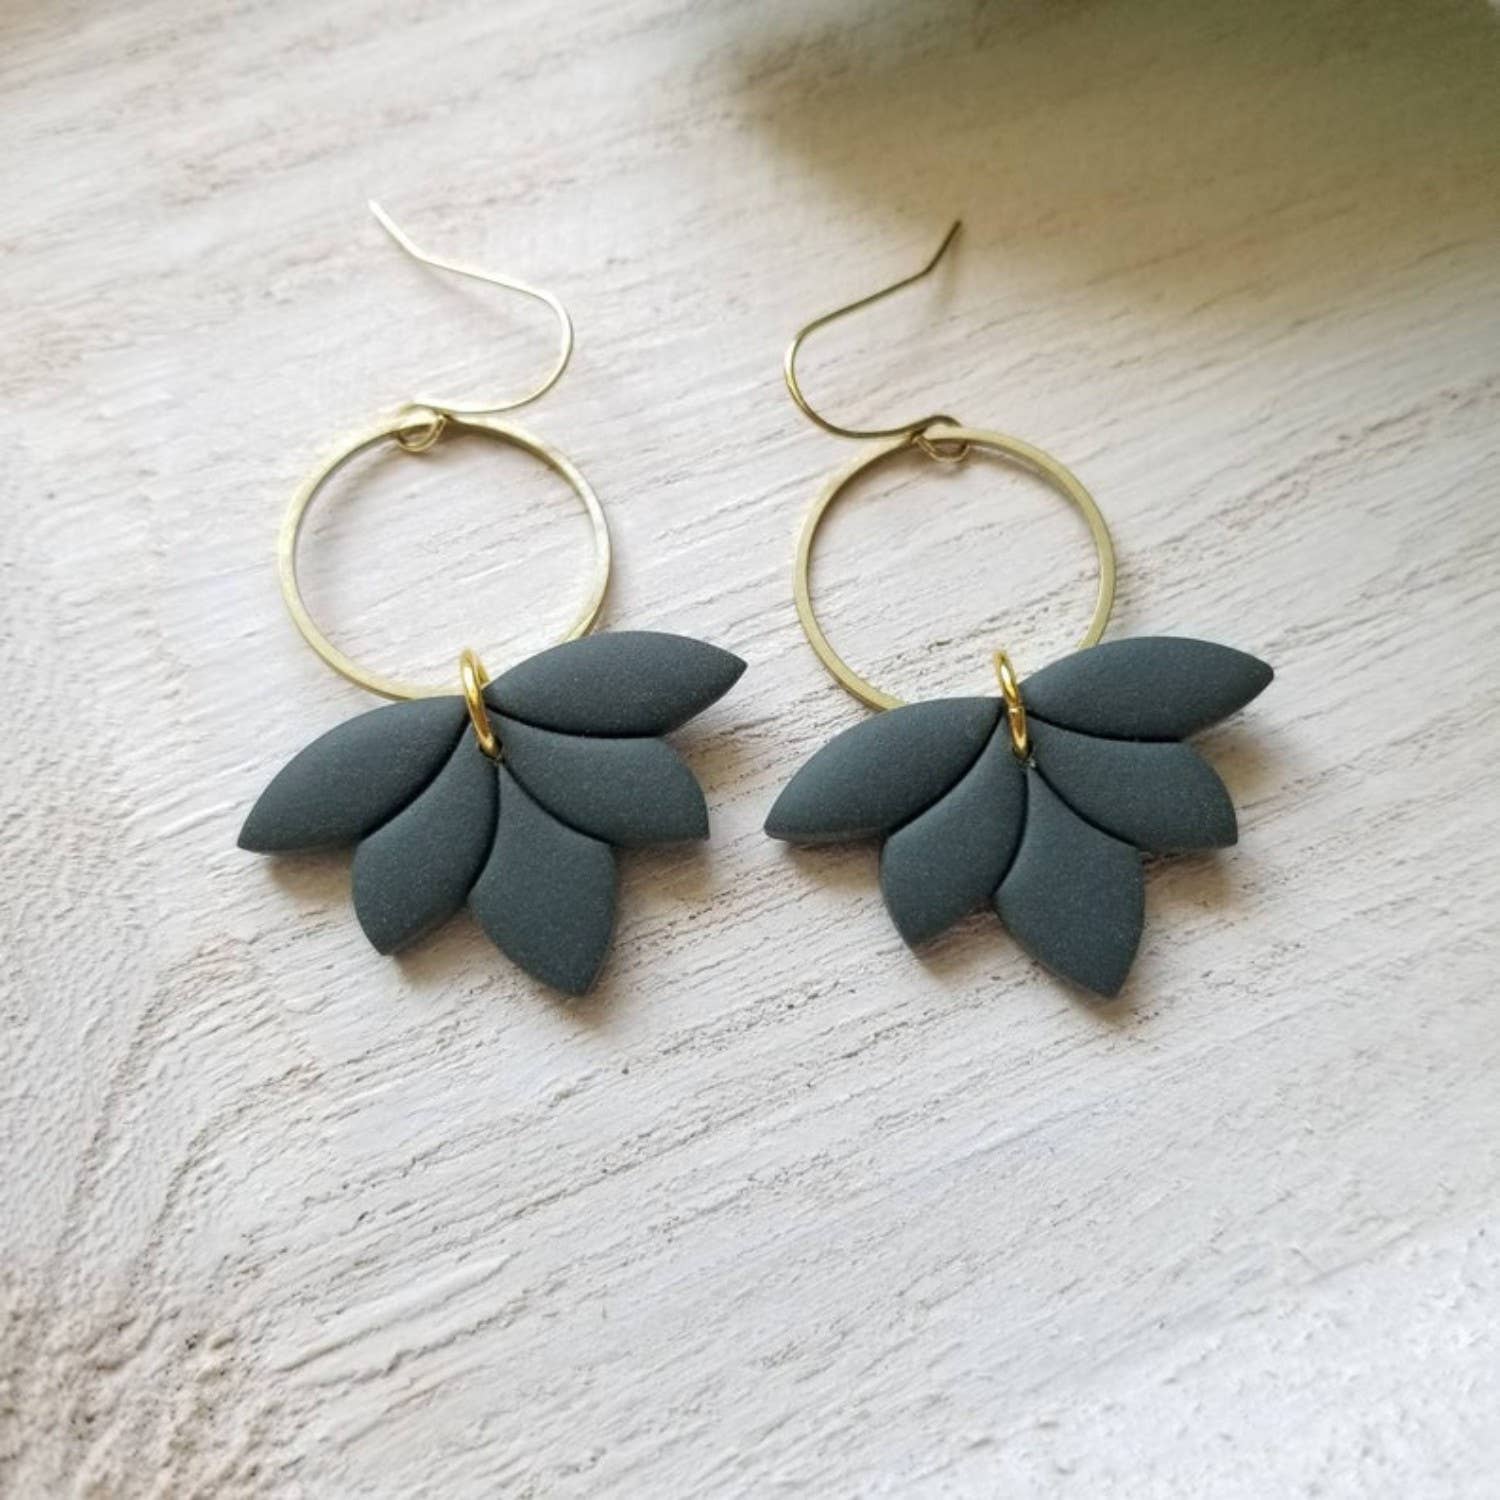 POLYMER CLAY // super lightweight // hypoallergenic and nickel free // statement earring